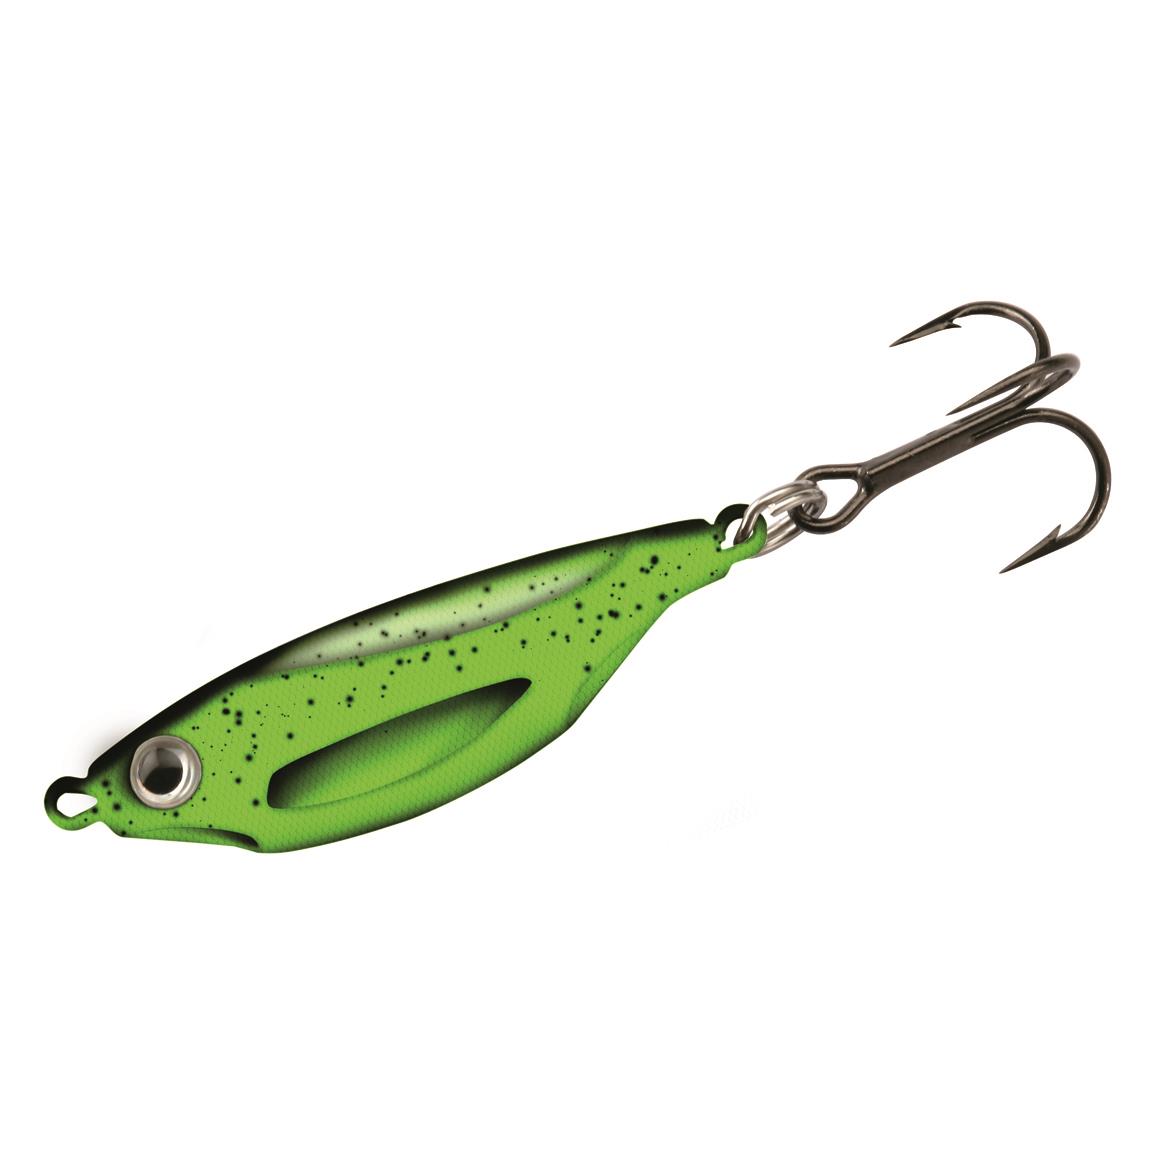 Clam Pro Tackle Tikka Mino 58 Oz 717987 Ice Tackle At Sportsmans Guide 